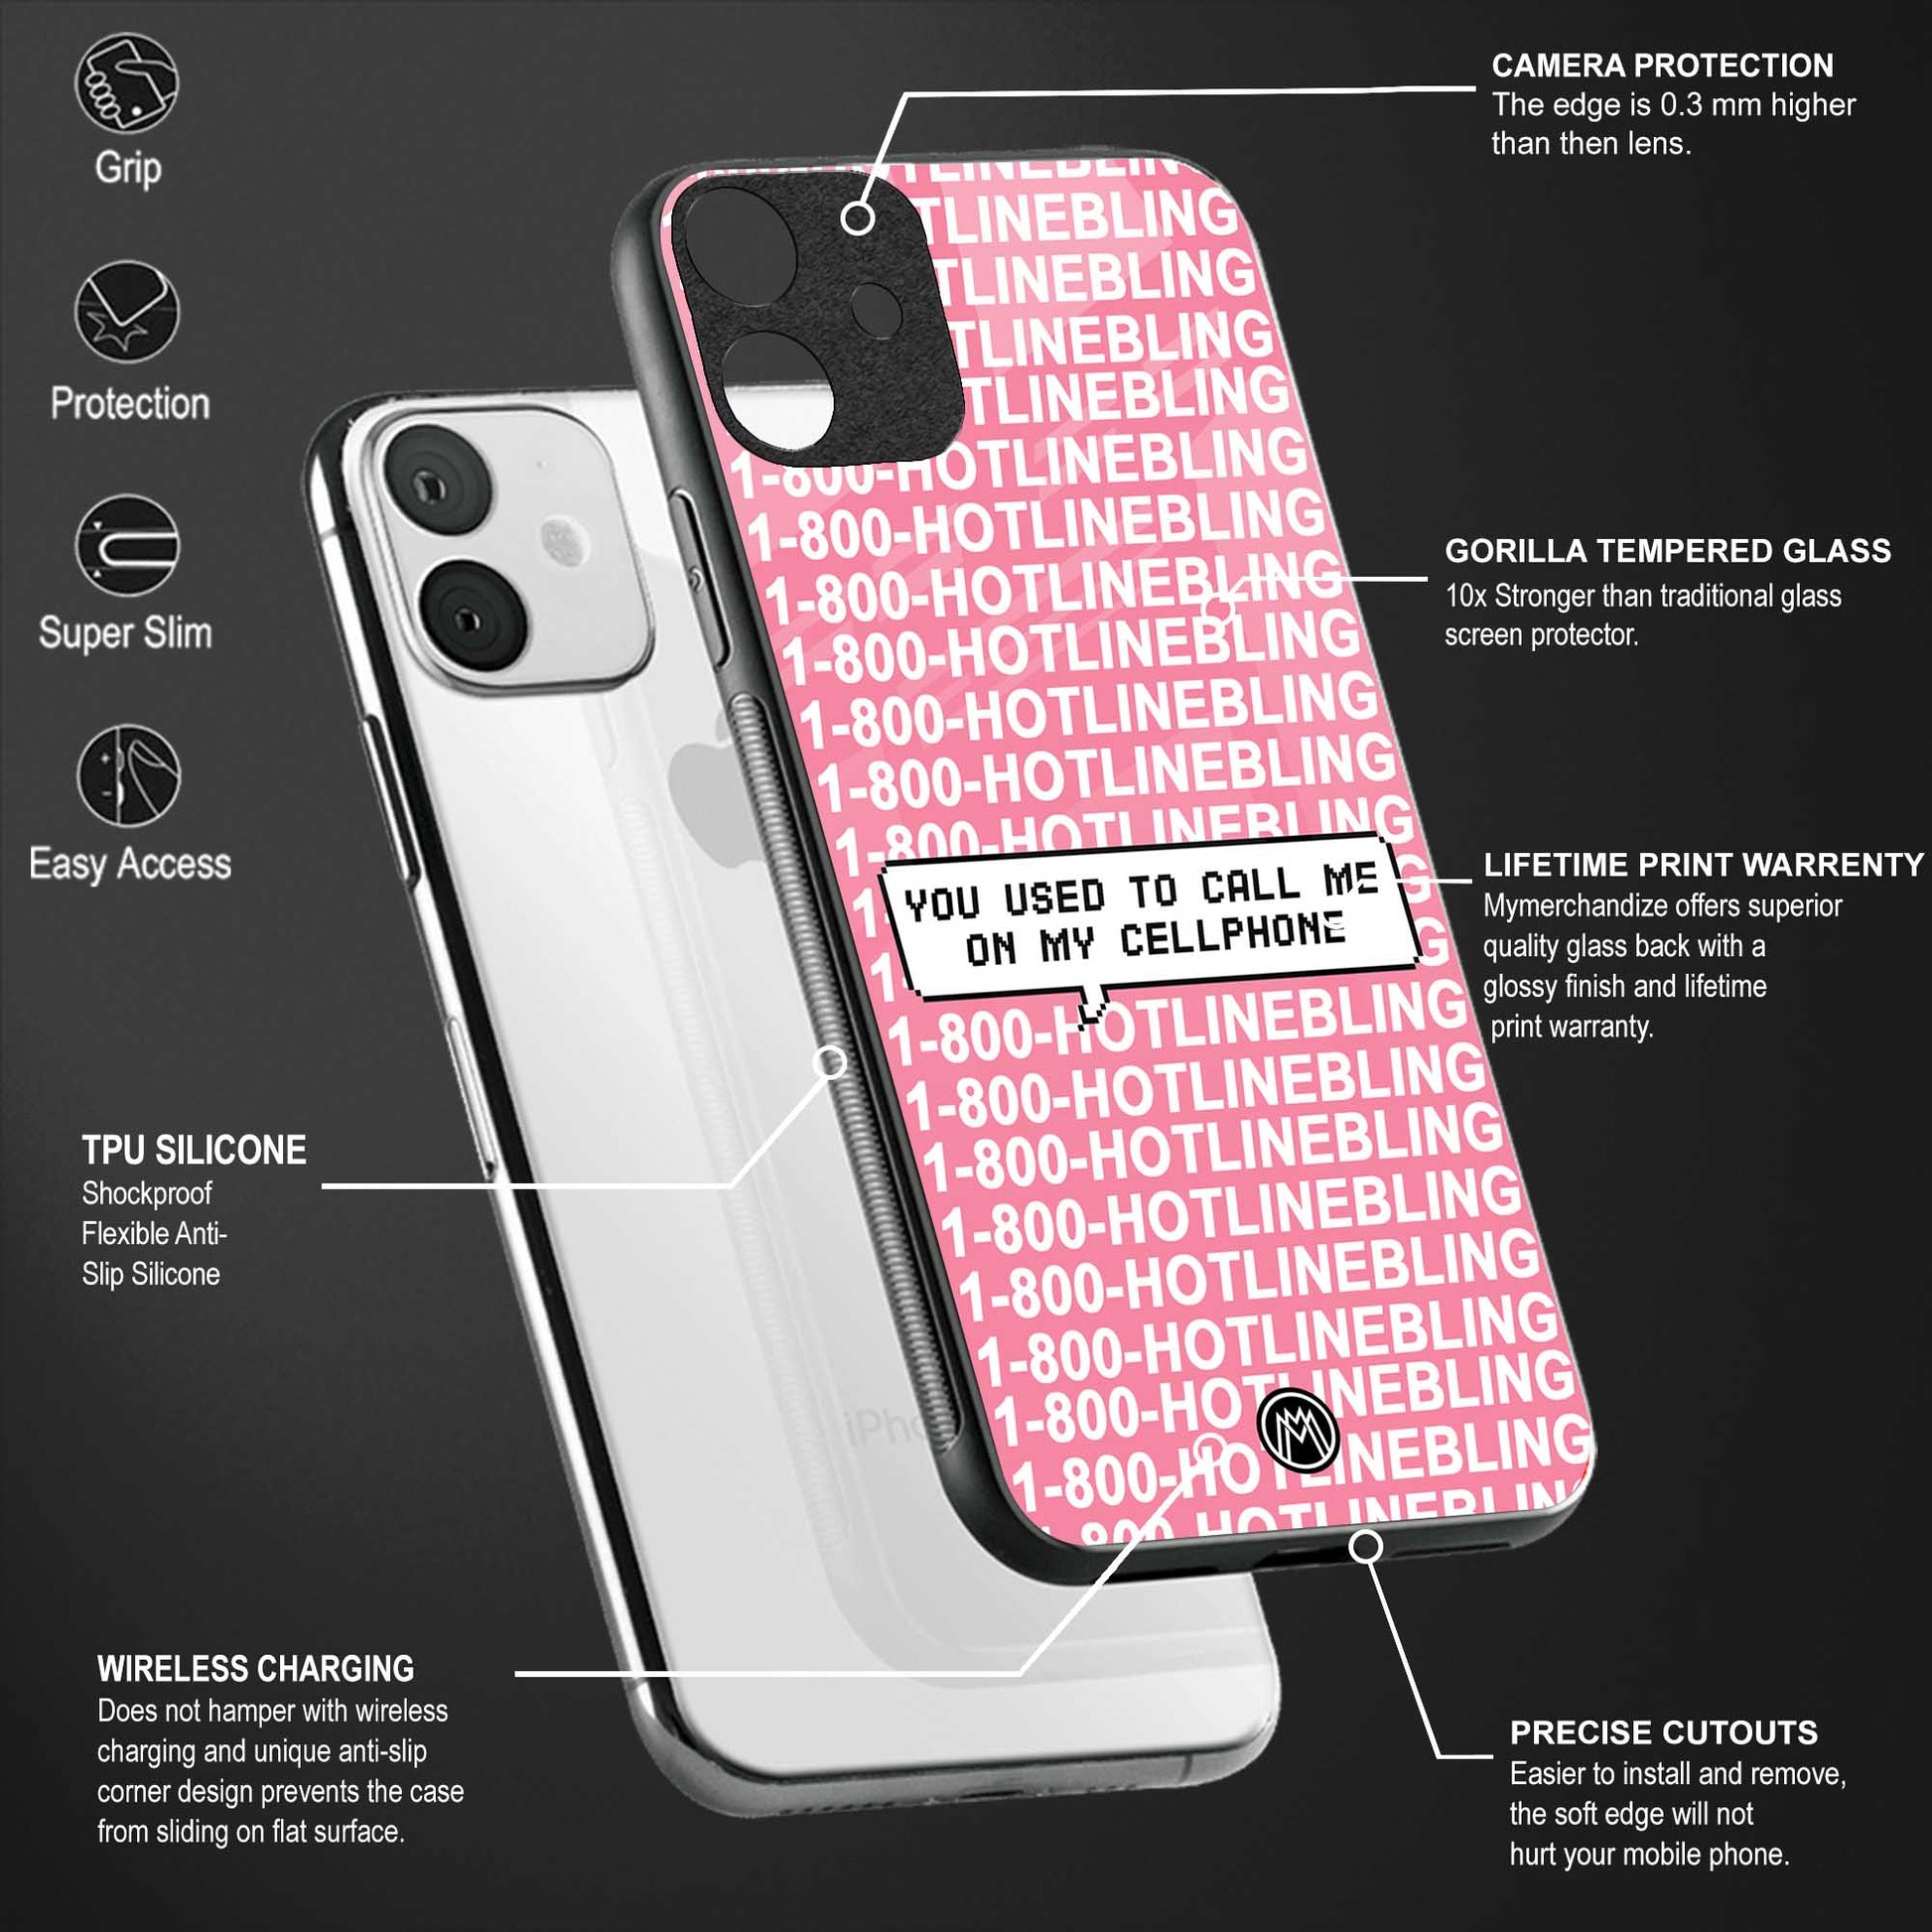 1800 hotline bling phone cover for iphone se 2020 